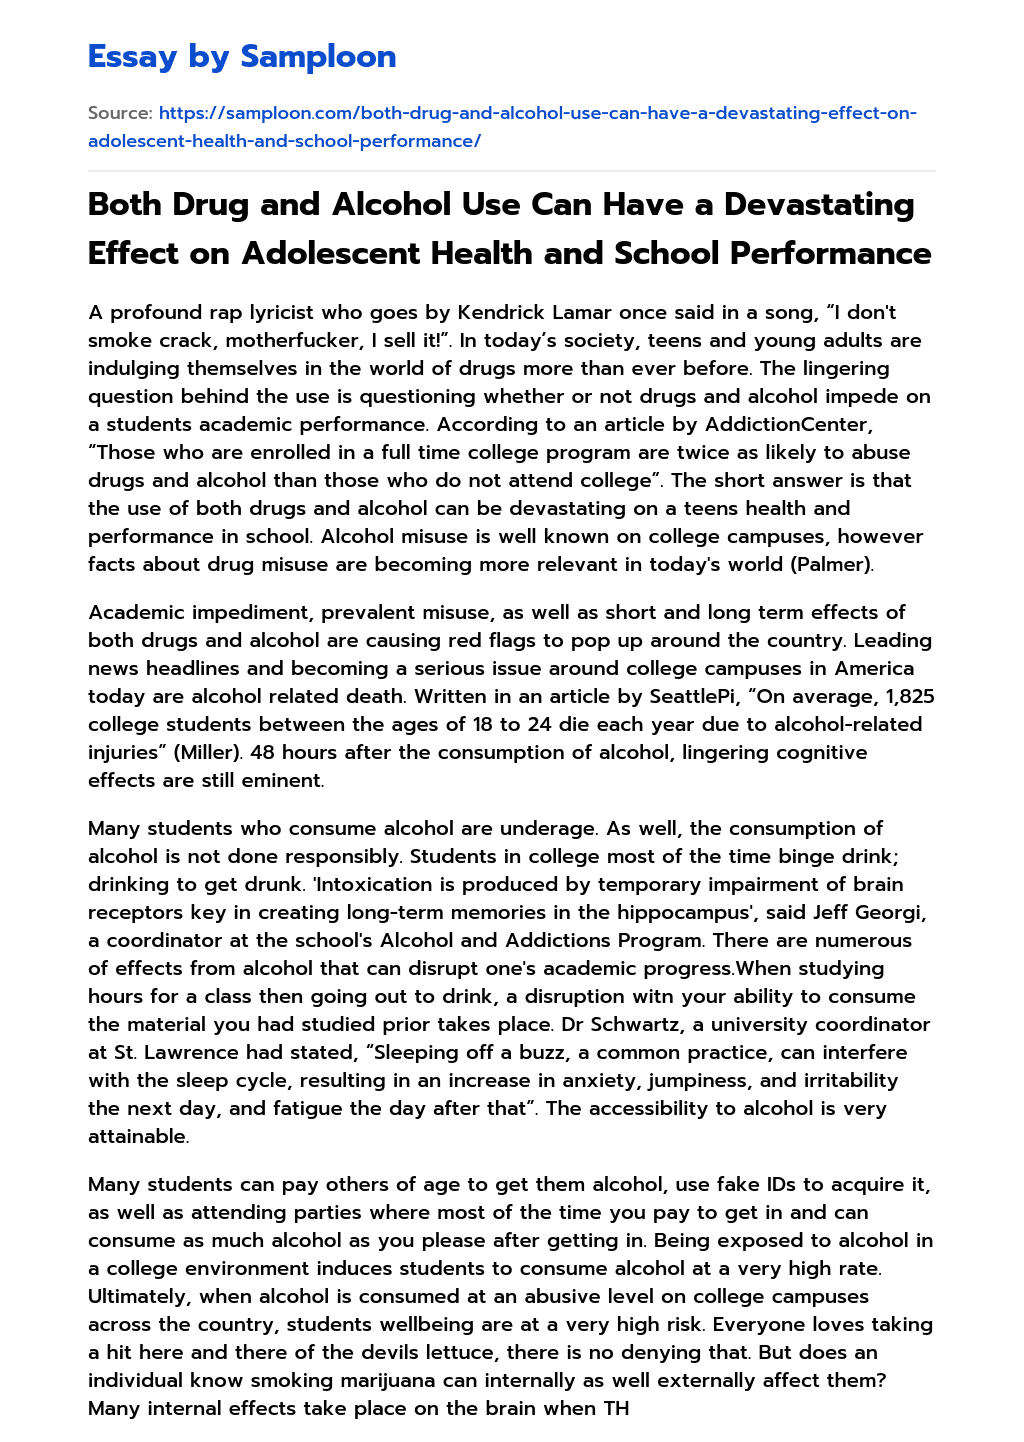 Both Drug and Alcohol Use Can Have a Devastating Effect on Adolescent Health and School Performance essay